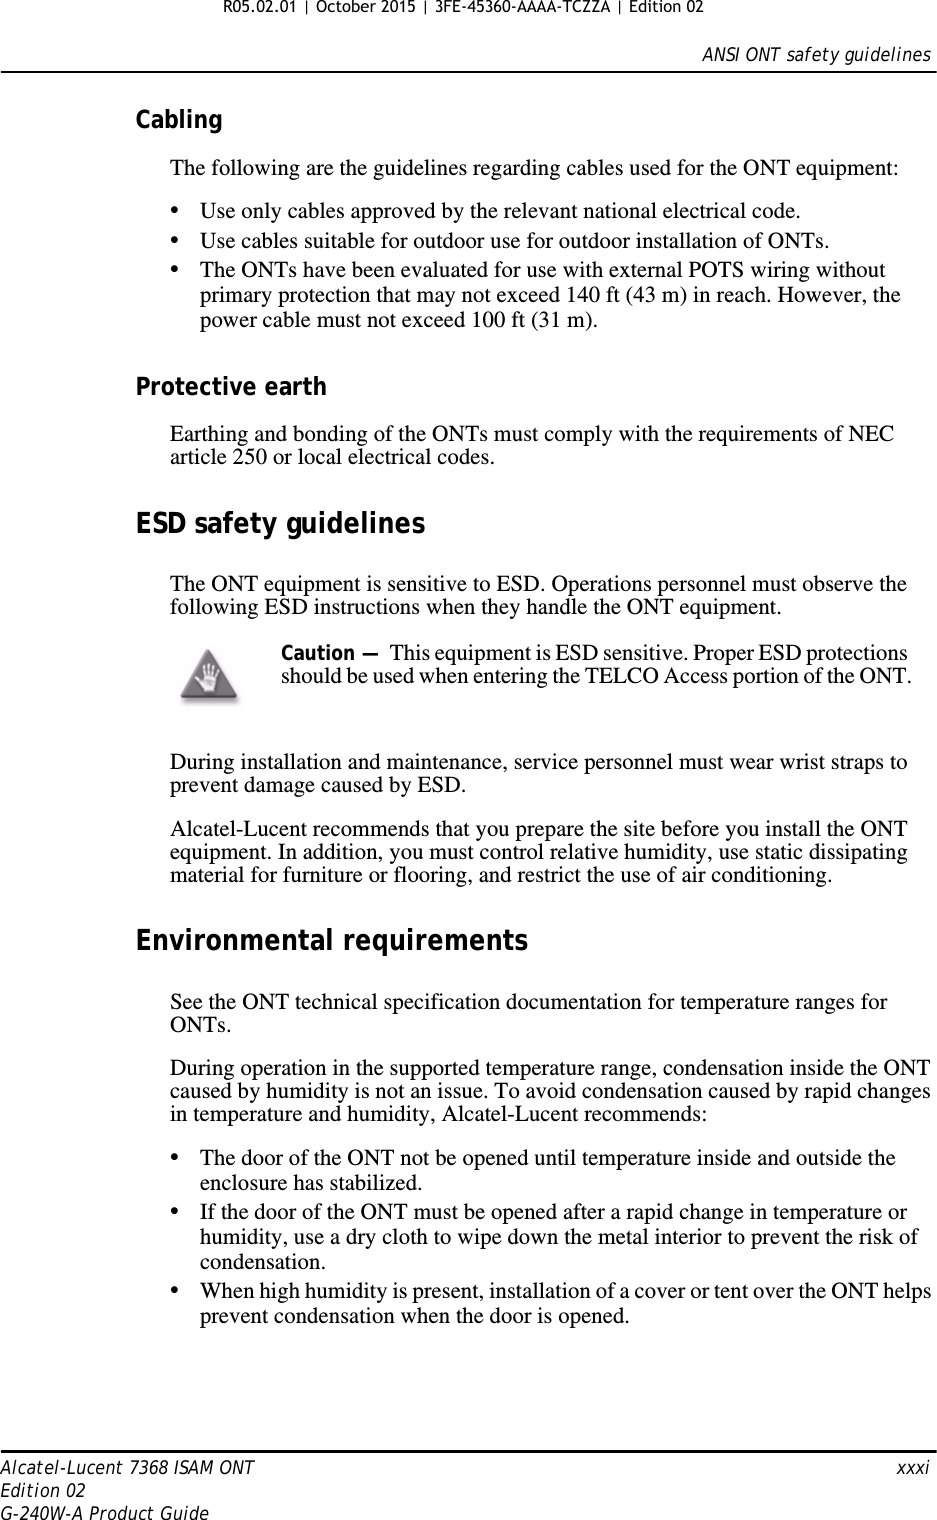 ANSI ONT safety guidelinesAlcatel-Lucent 7368 ISAM ONT   xxxiEdition 02G-240W-A Product GuideCablingThe following are the guidelines regarding cables used for the ONT equipment:•Use only cables approved by the relevant national electrical code.•Use cables suitable for outdoor use for outdoor installation of ONTs.•The ONTs have been evaluated for use with external POTS wiring without primary protection that may not exceed 140 ft (43 m) in reach. However, the power cable must not exceed 100 ft (31 m).Protective earthEarthing and bonding of the ONTs must comply with the requirements of NEC article 250 or local electrical codes.ESD safety guidelinesThe ONT equipment is sensitive to ESD. Operations personnel must observe the following ESD instructions when they handle the ONT equipment. During installation and maintenance, service personnel must wear wrist straps to prevent damage caused by ESD.Alcatel-Lucent recommends that you prepare the site before you install the ONT equipment. In addition, you must control relative humidity, use static dissipating material for furniture or flooring, and restrict the use of air conditioning.Environmental requirementsSee the ONT technical specification documentation for temperature ranges for ONTs.During operation in the supported temperature range, condensation inside the ONT caused by humidity is not an issue. To avoid condensation caused by rapid changes in temperature and humidity, Alcatel-Lucent recommends:•The door of the ONT not be opened until temperature inside and outside the enclosure has stabilized.•If the door of the ONT must be opened after a rapid change in temperature or humidity, use a dry cloth to wipe down the metal interior to prevent the risk of condensation.•When high humidity is present, installation of a cover or tent over the ONT helps prevent condensation when the door is opened.Caution —  This equipment is ESD sensitive. Proper ESD protections should be used when entering the TELCO Access portion of the ONT. R05.02.01 | October 2015 | 3FE-45360-AAAA-TCZZA | Edition 02 